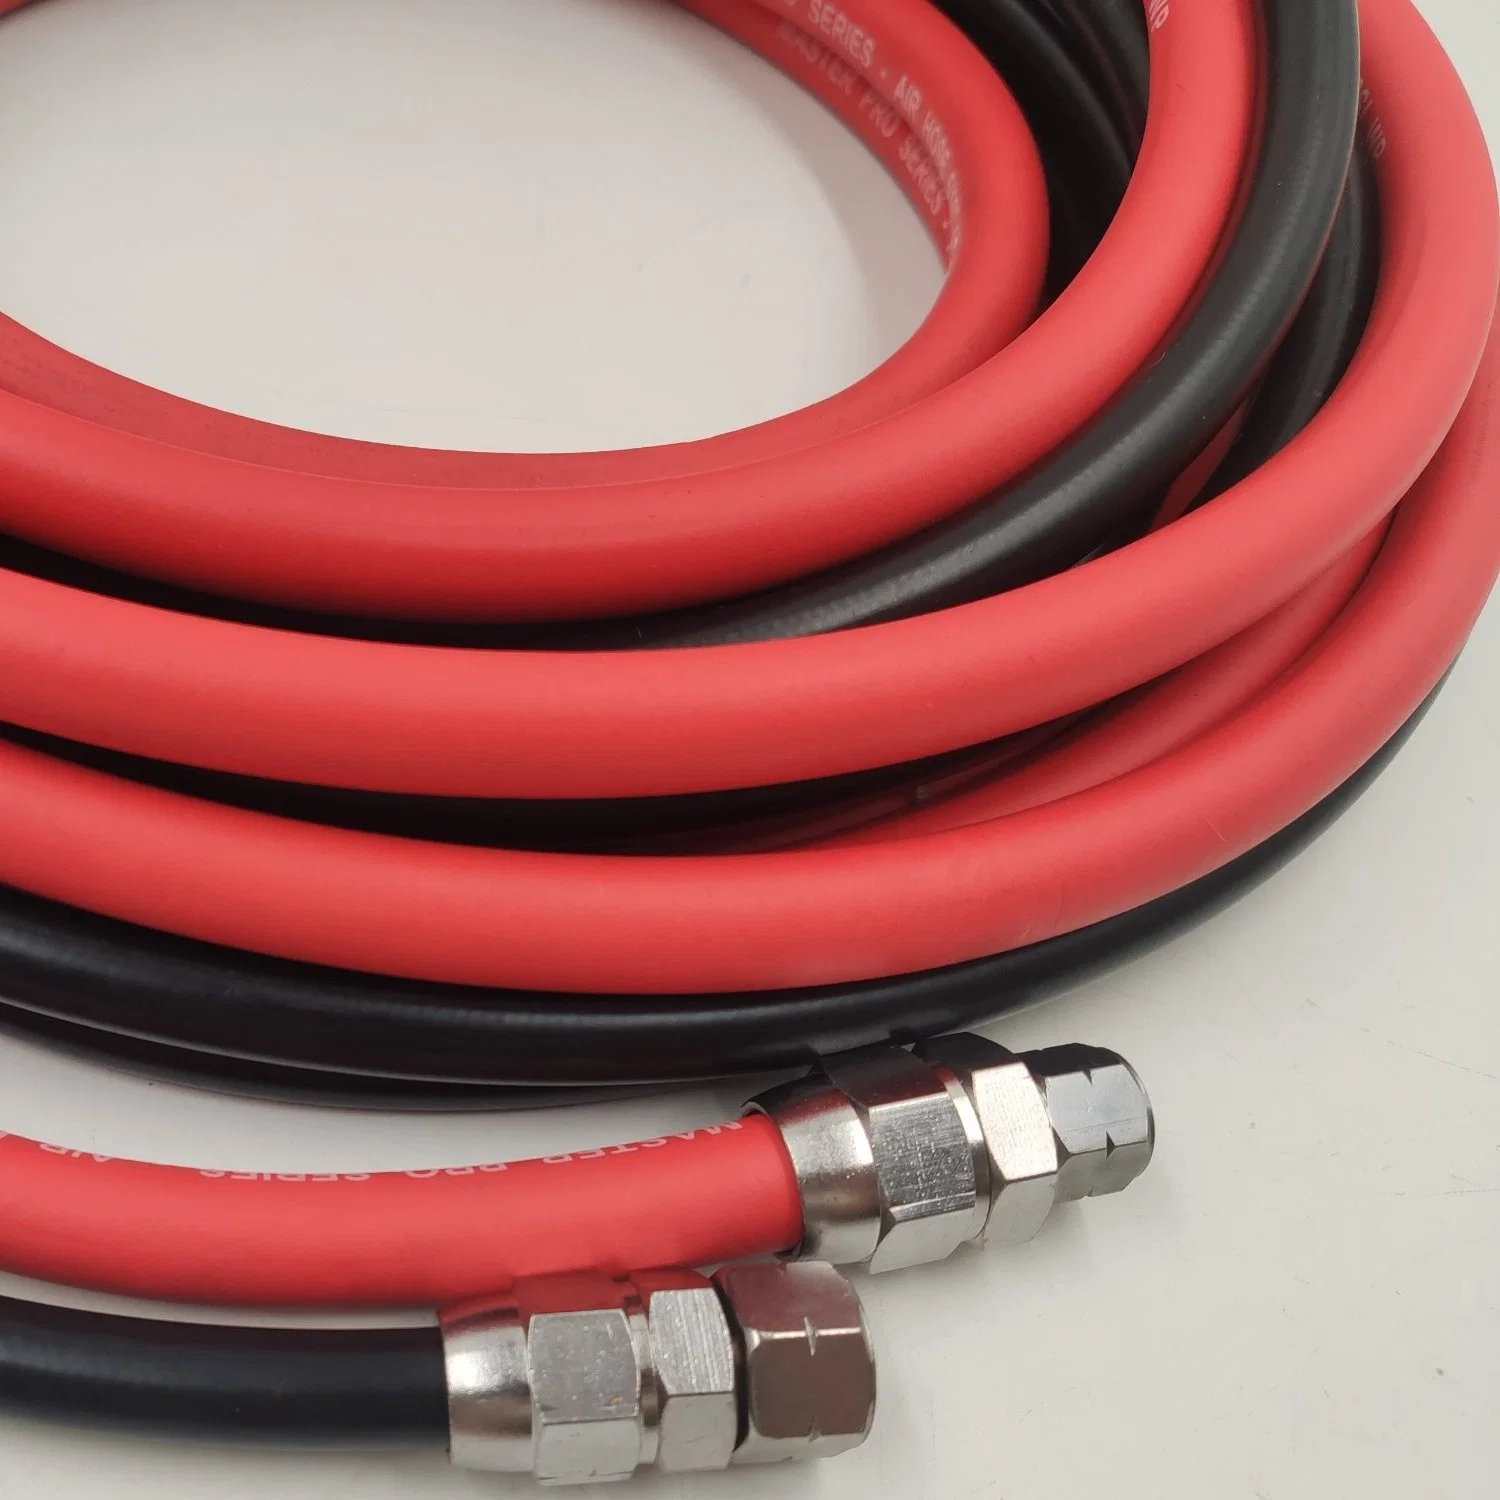 Air and Fluid Hose Assembly for Spray Guns, Paint Pressure Pot Tanks